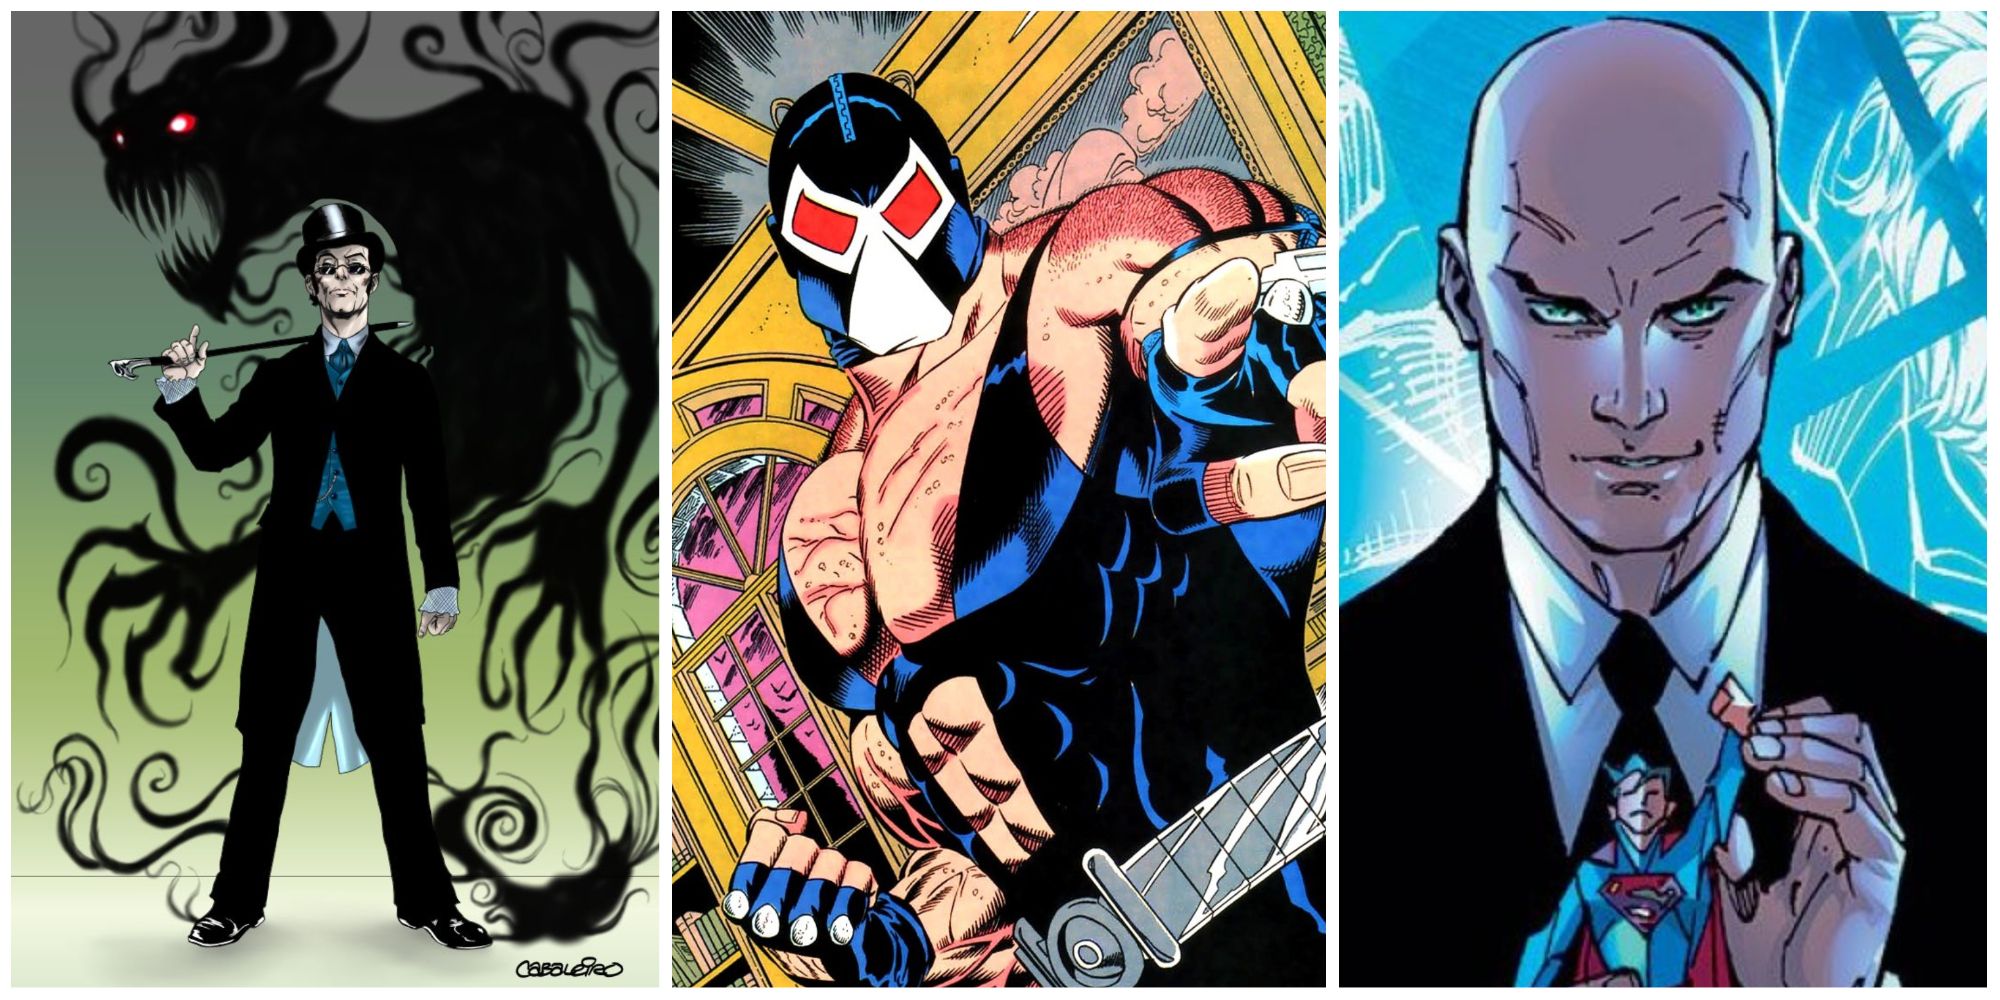 A split image of Shade, Bane, and Lex Luthor from DC Comics